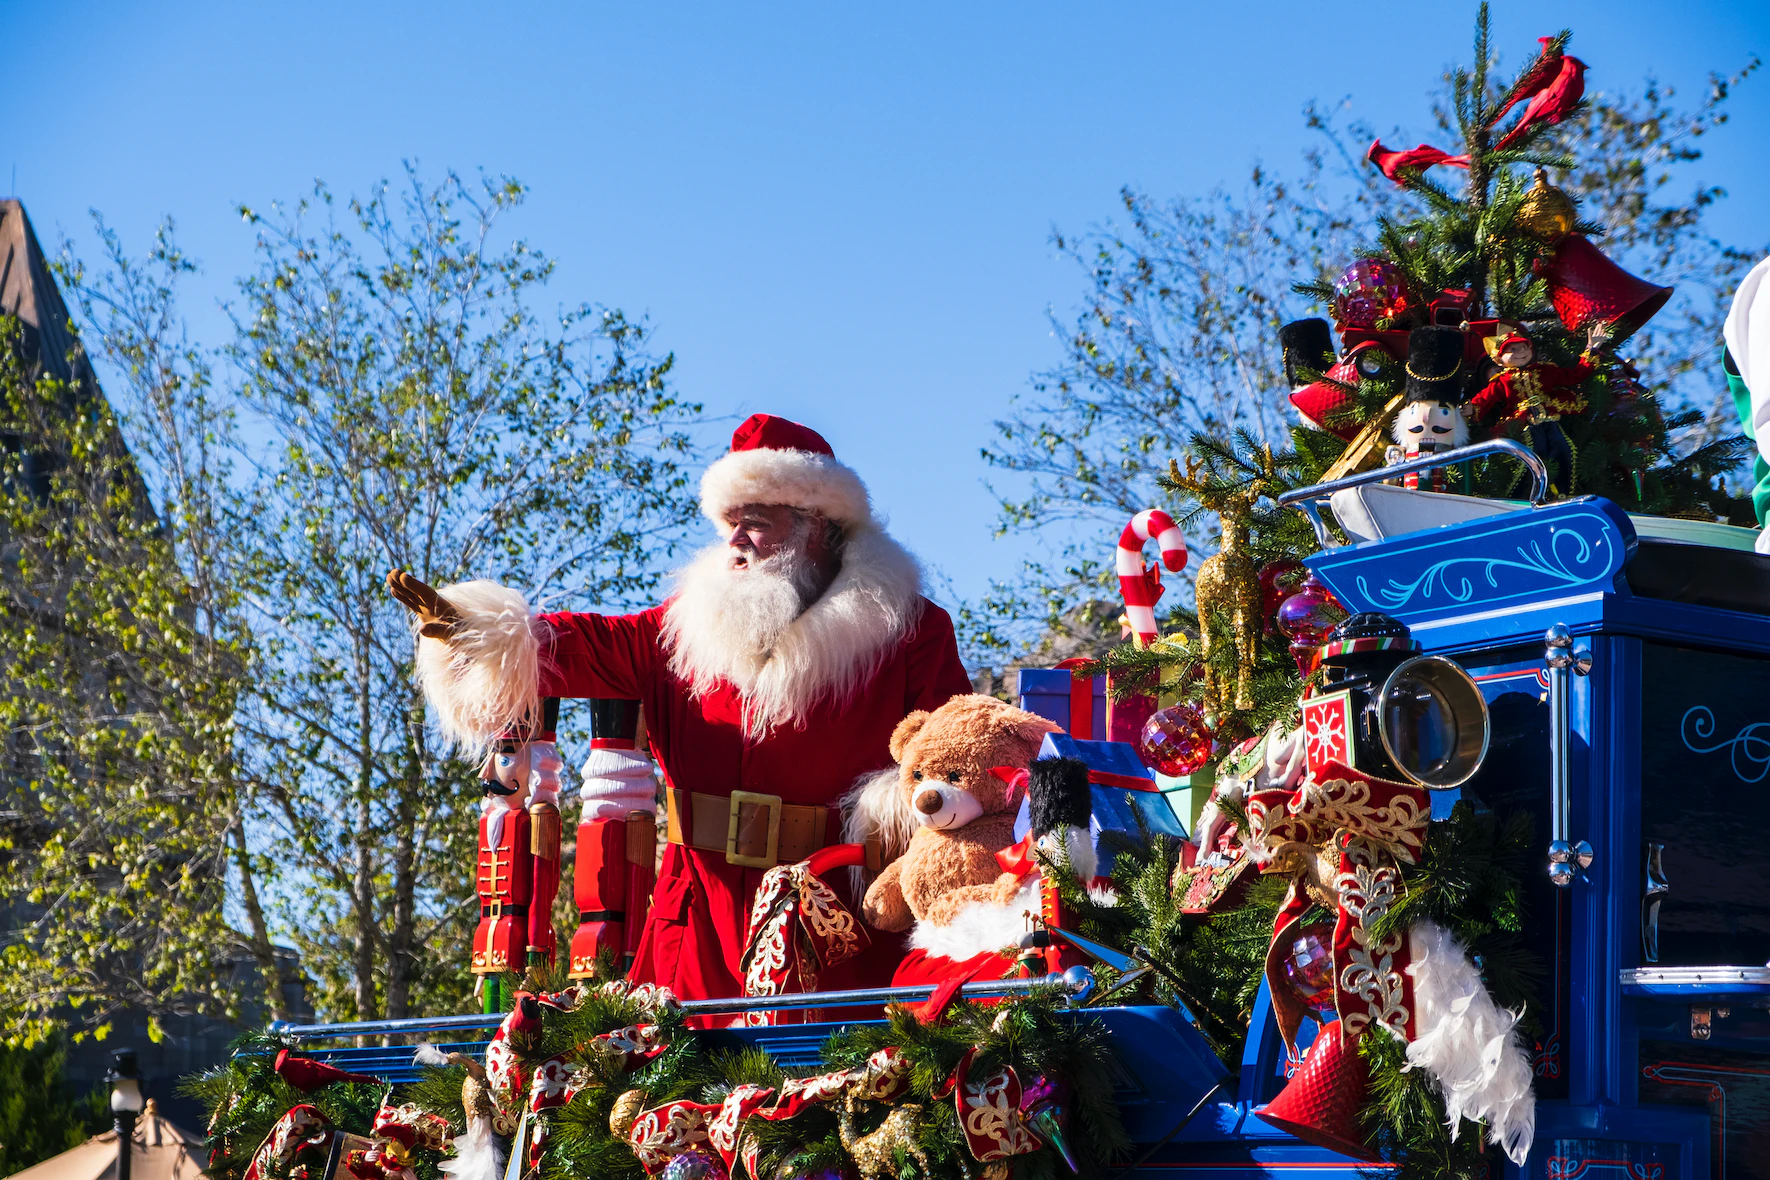 Santa Claus waving atop a sleigh filled with toys and presents